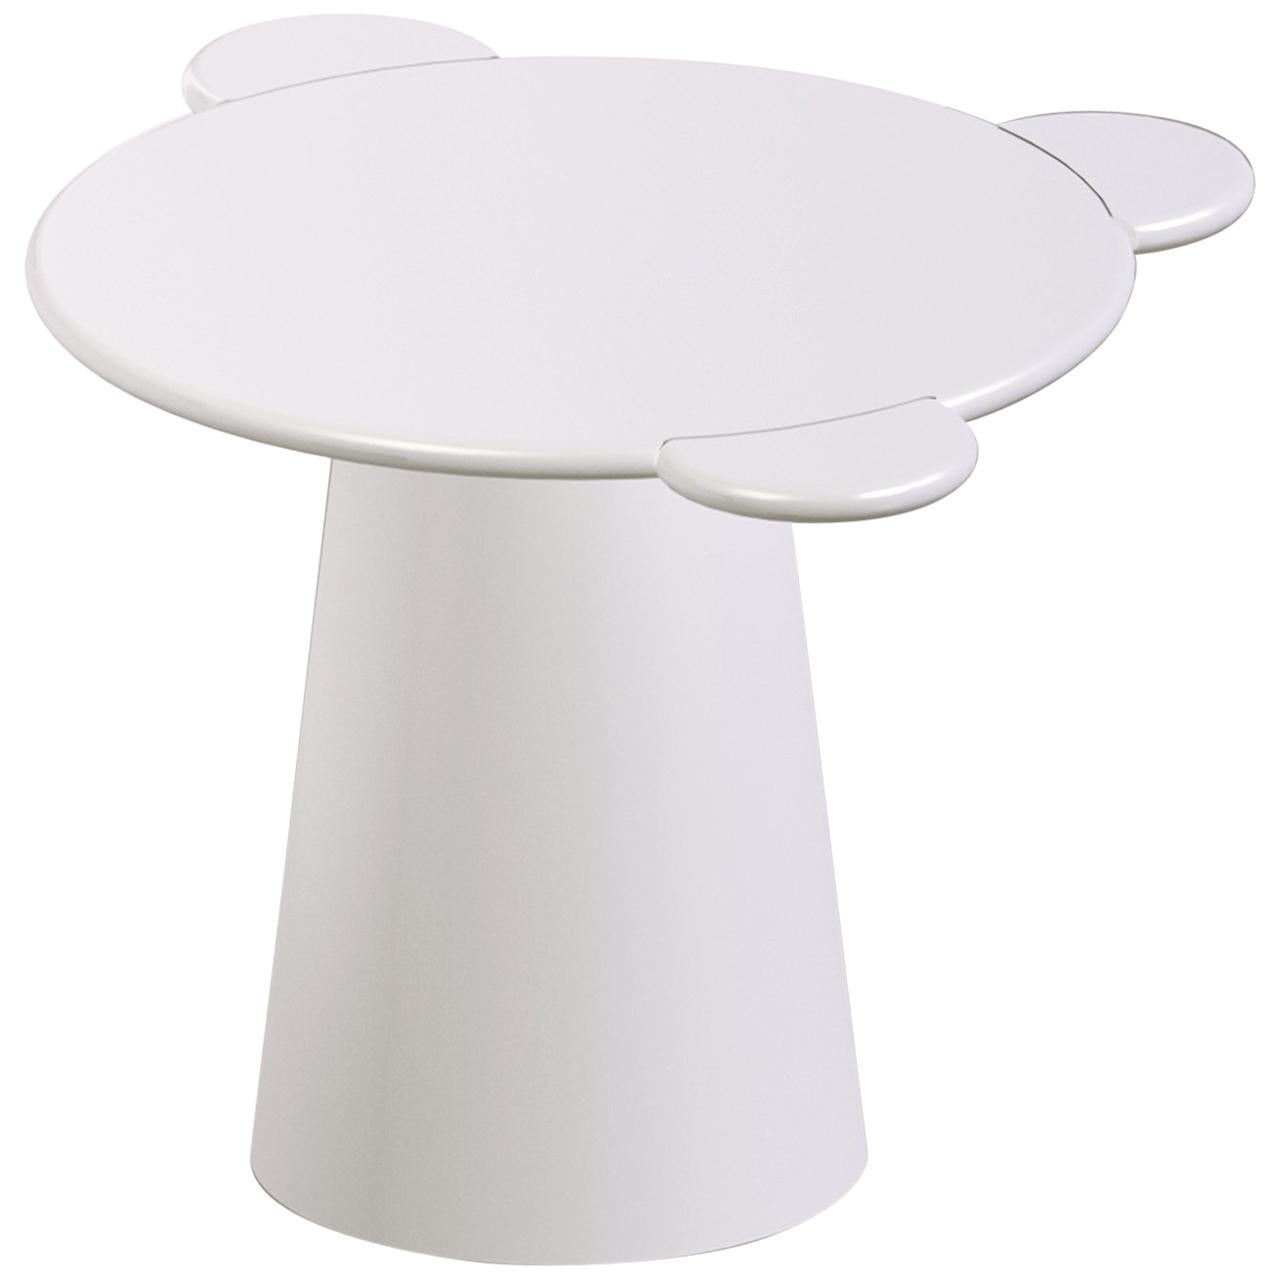 Contemporary Coffee Table White Donald Wood by Chapel Petrassi im Angebot